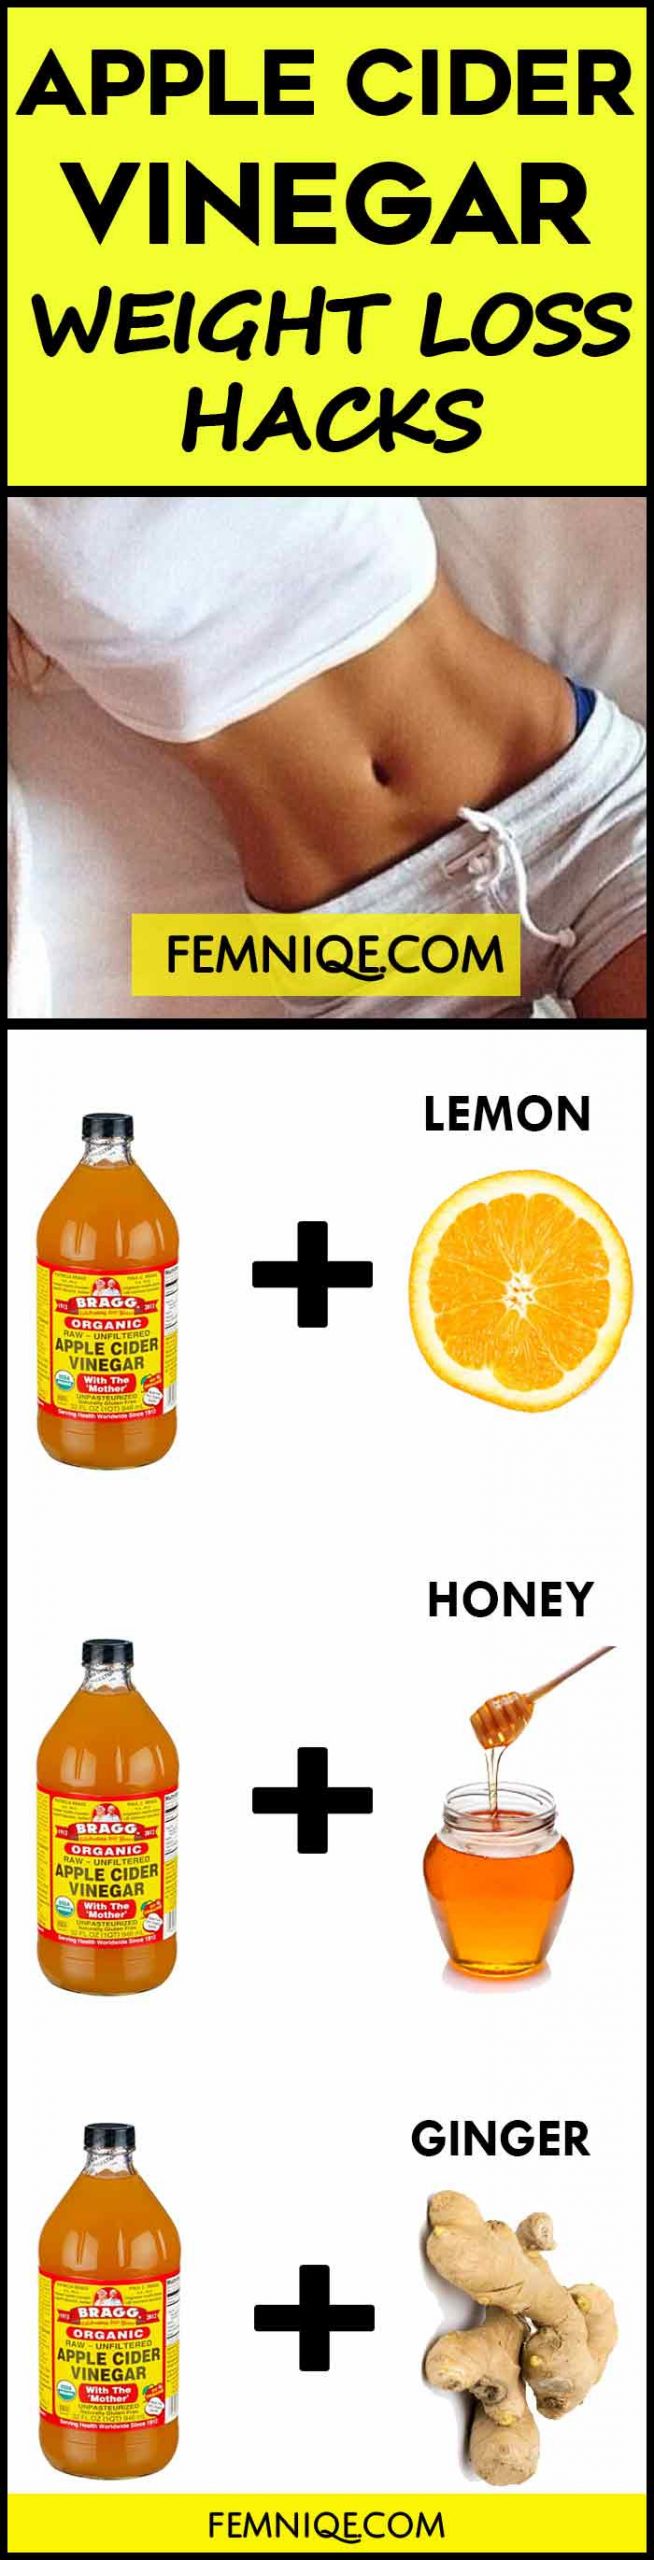 Weight Loss With Apple Cider Vinegar
 How To Use Apple Cider Vinegar for Weight Loss Femniqe